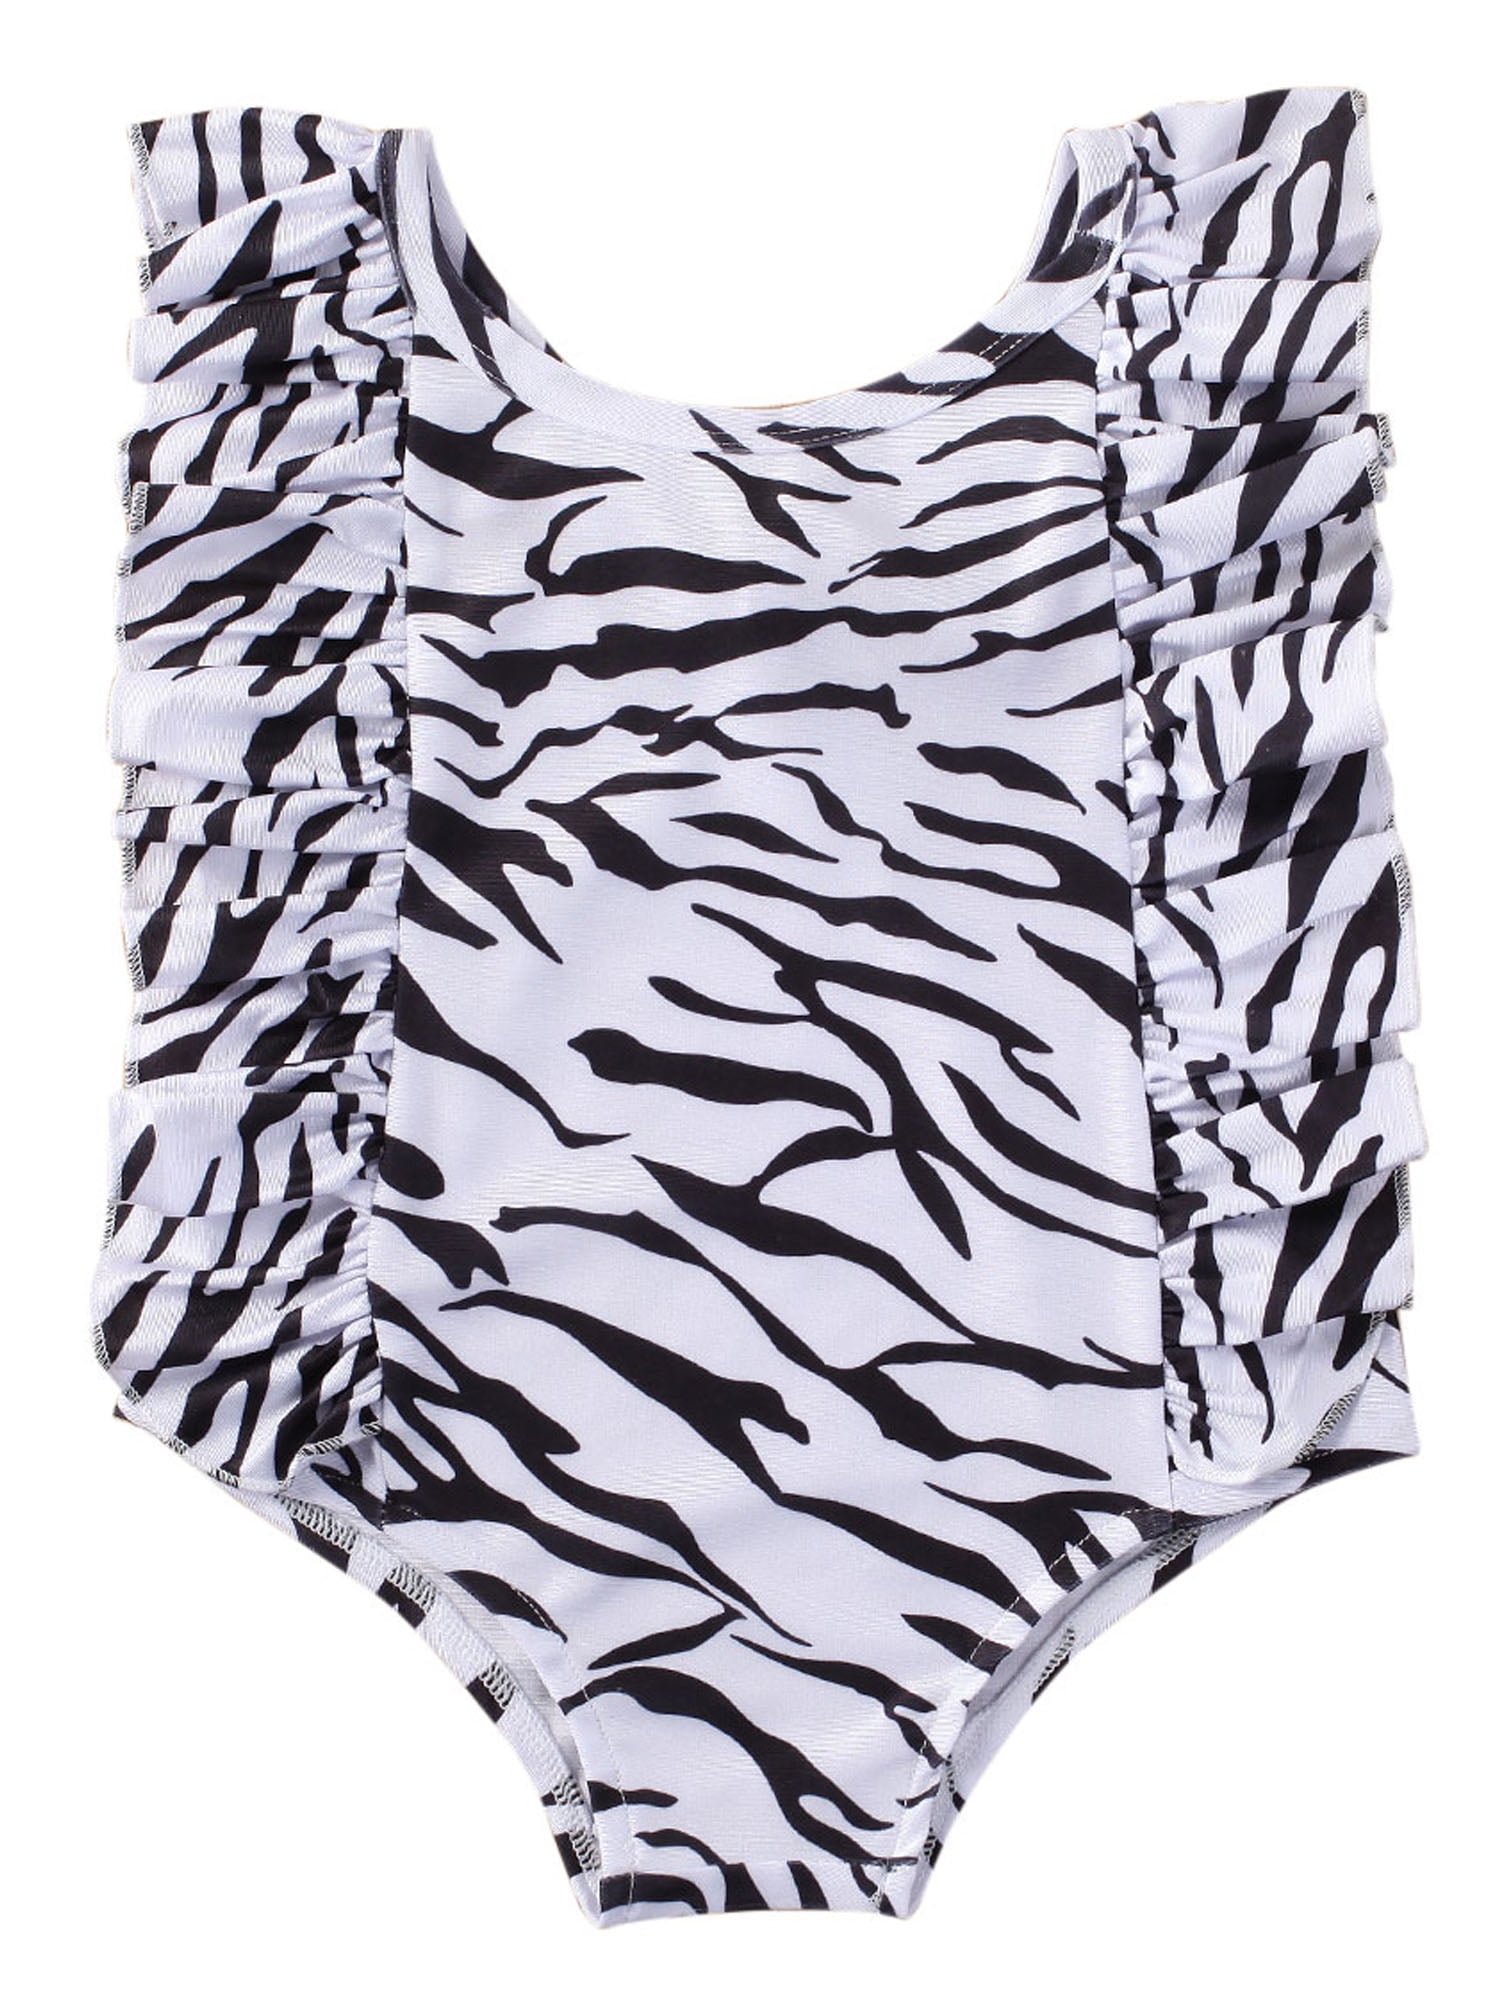 Zebra Feed Me Summer Baby Sleeveless Romper One-Piece Bodysuit Jumpsuit Outfits